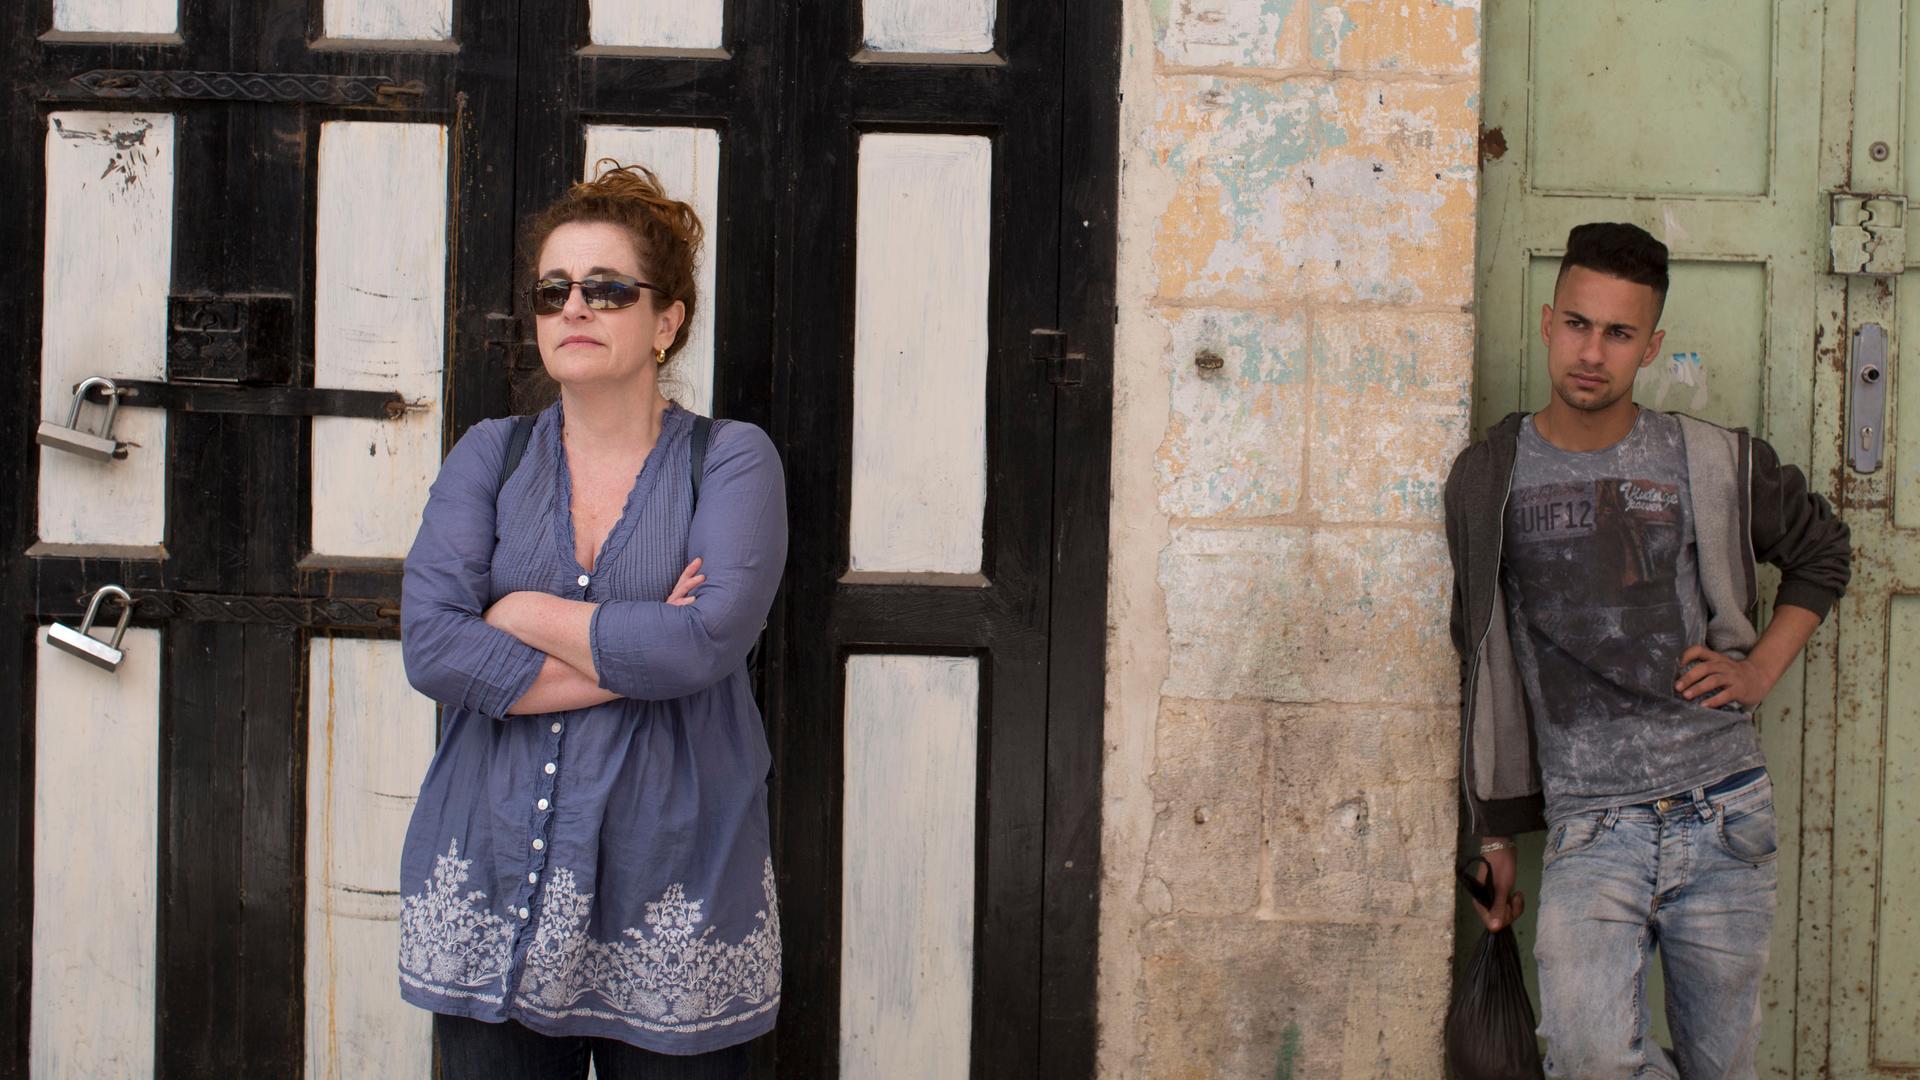 Novelist Ayelet Waldman and a Palestinian man in Hebron. “For most of my life, I loved Israel, I longed for Israel, I planned to live in Israel,” she says.